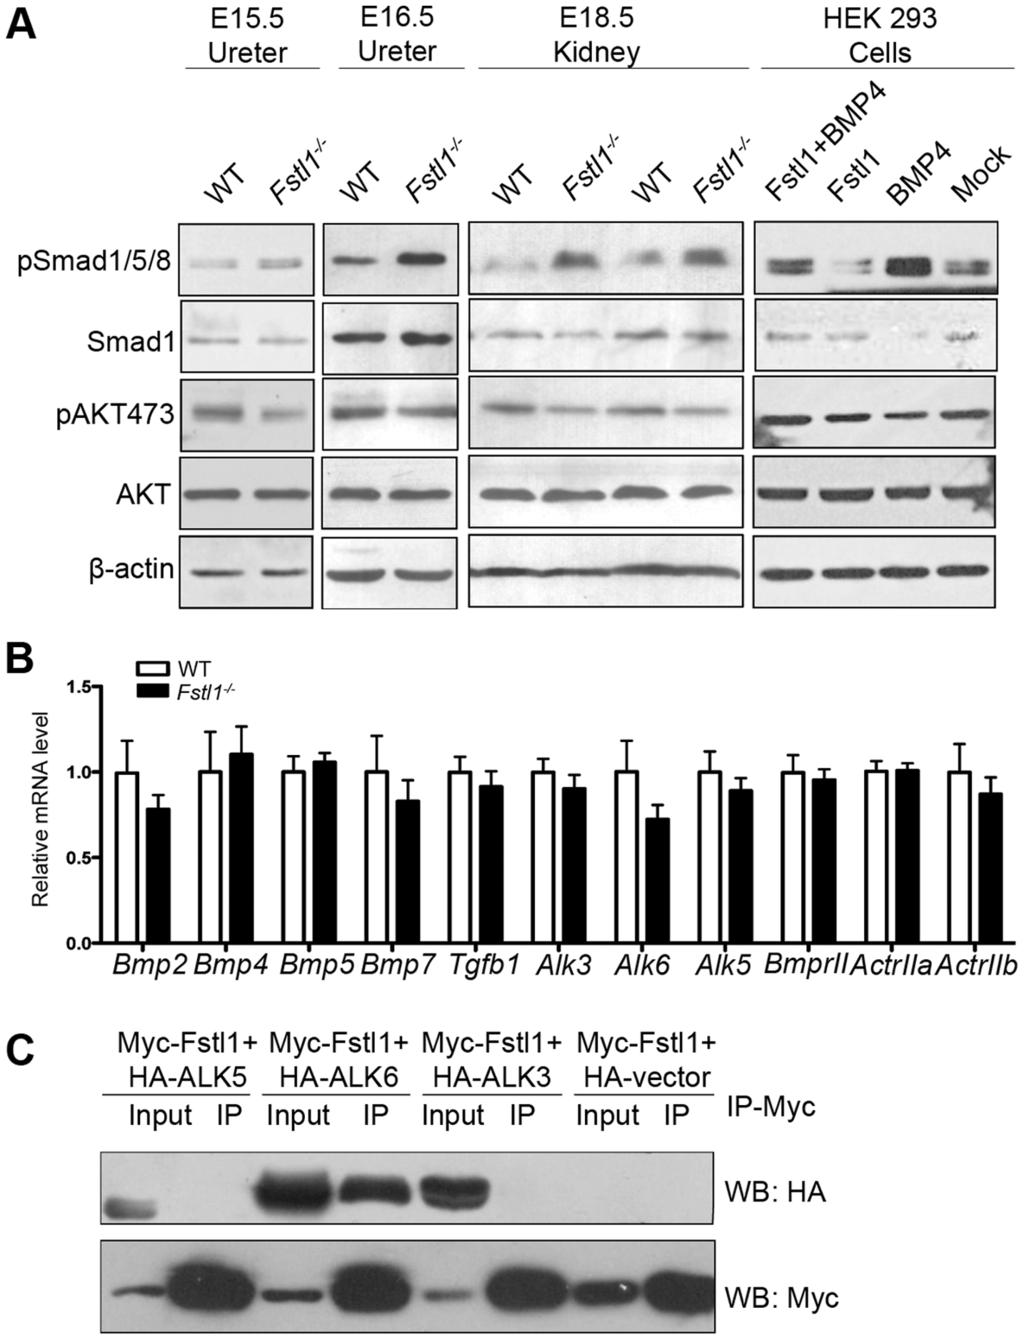 Fig. 6. Up-regulation of BMP signaling in the Fstl1 -/- ureter and kidney. (A) Western blots of psmad1/5/8, Smad1, pakt (Ser 473 ), AKT, and b- actin from E15.5 (left panel) and E16.